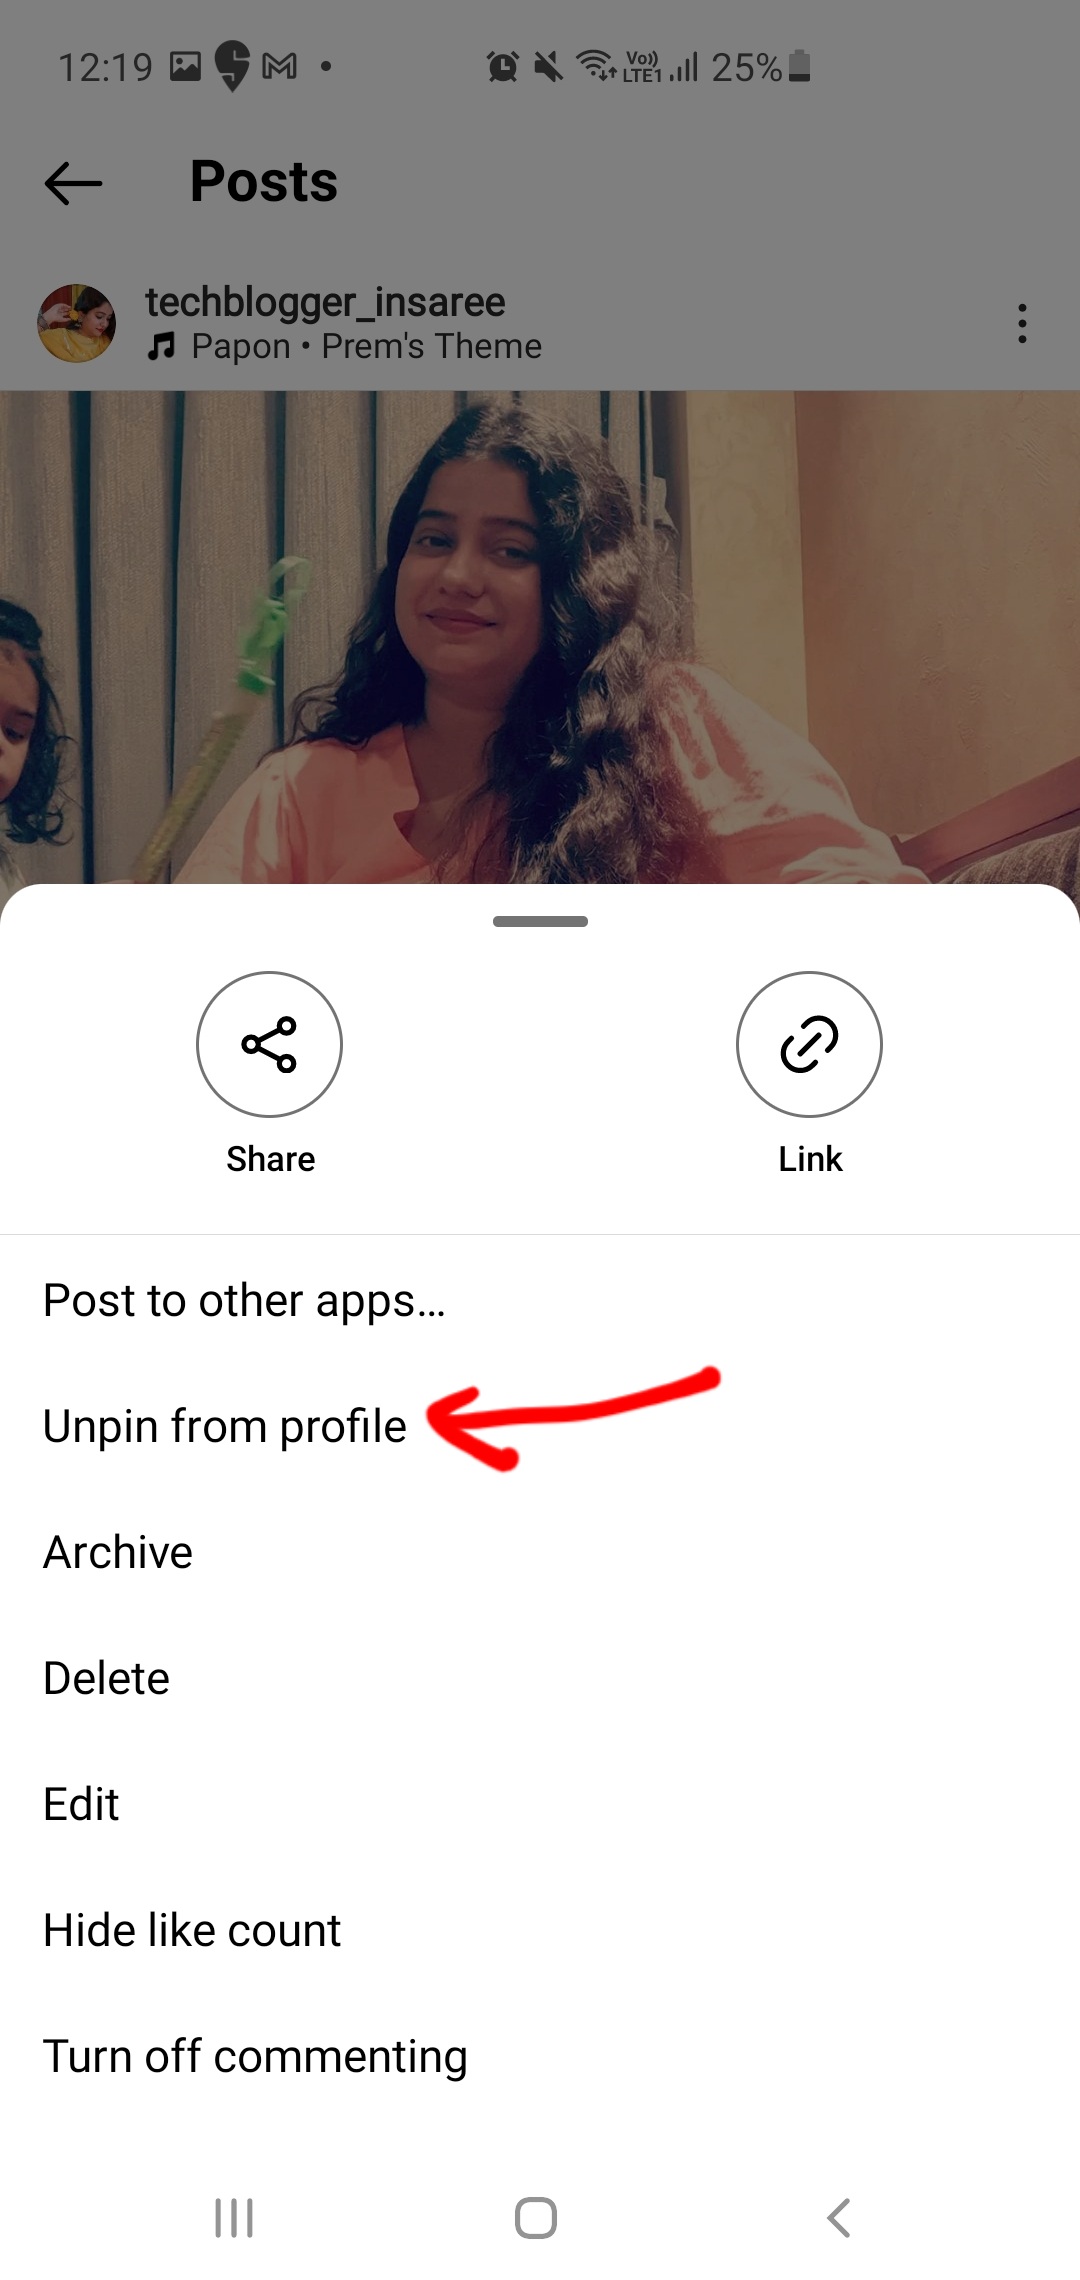 How To Pin A Post In Instagram?